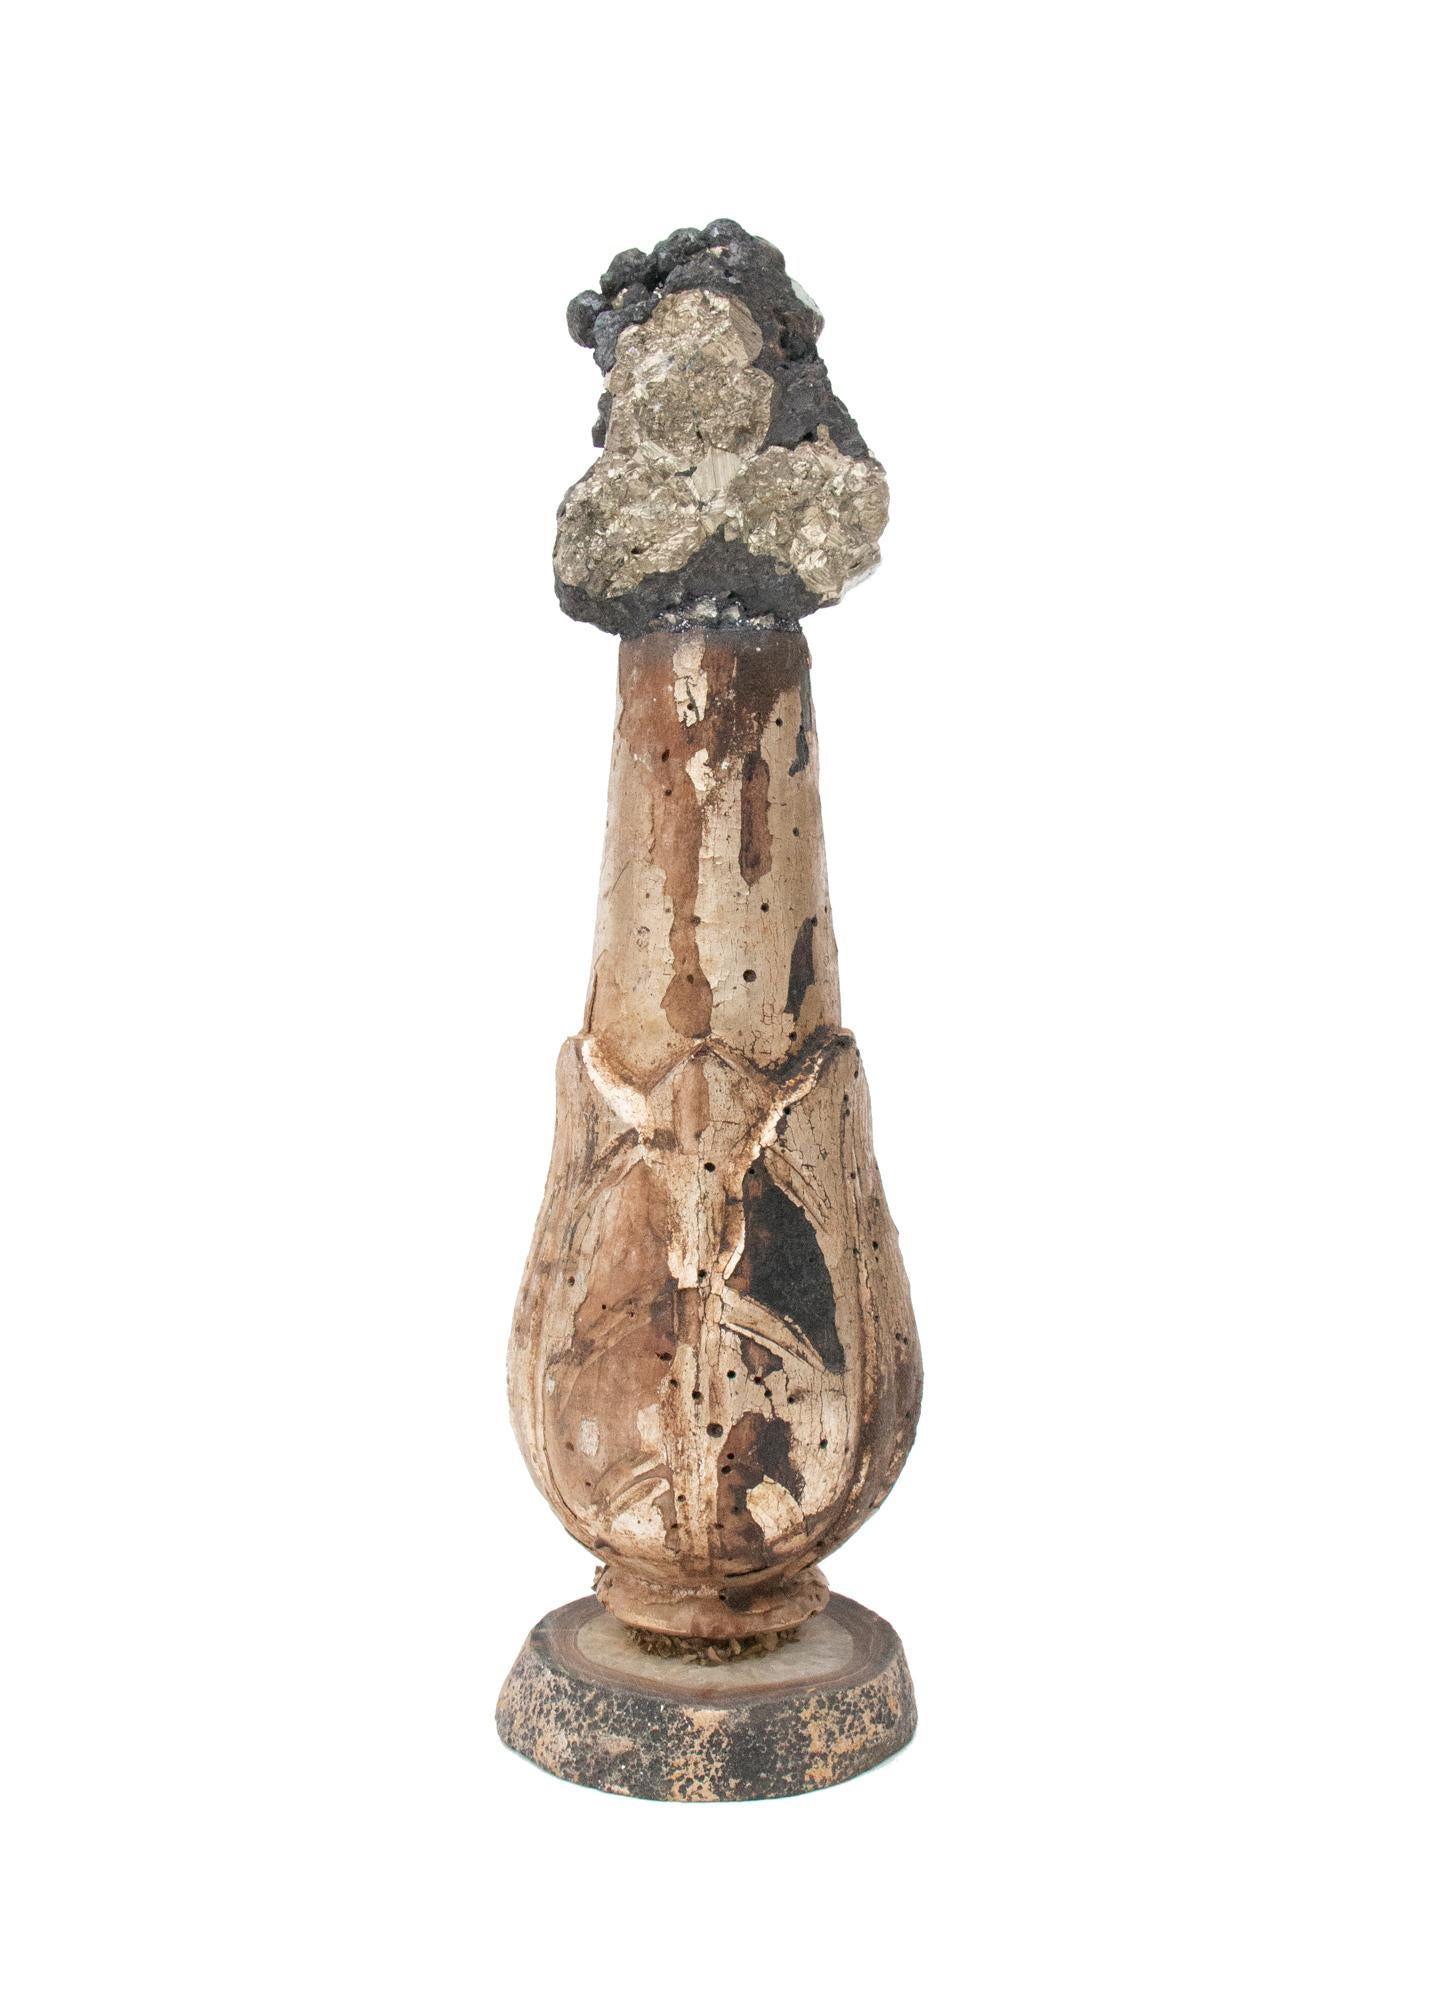 18th Century Italian Gilded Candlestick Fragment with Pyrite in Matrix on Agate In Good Condition For Sale In Dublin, Dalkey